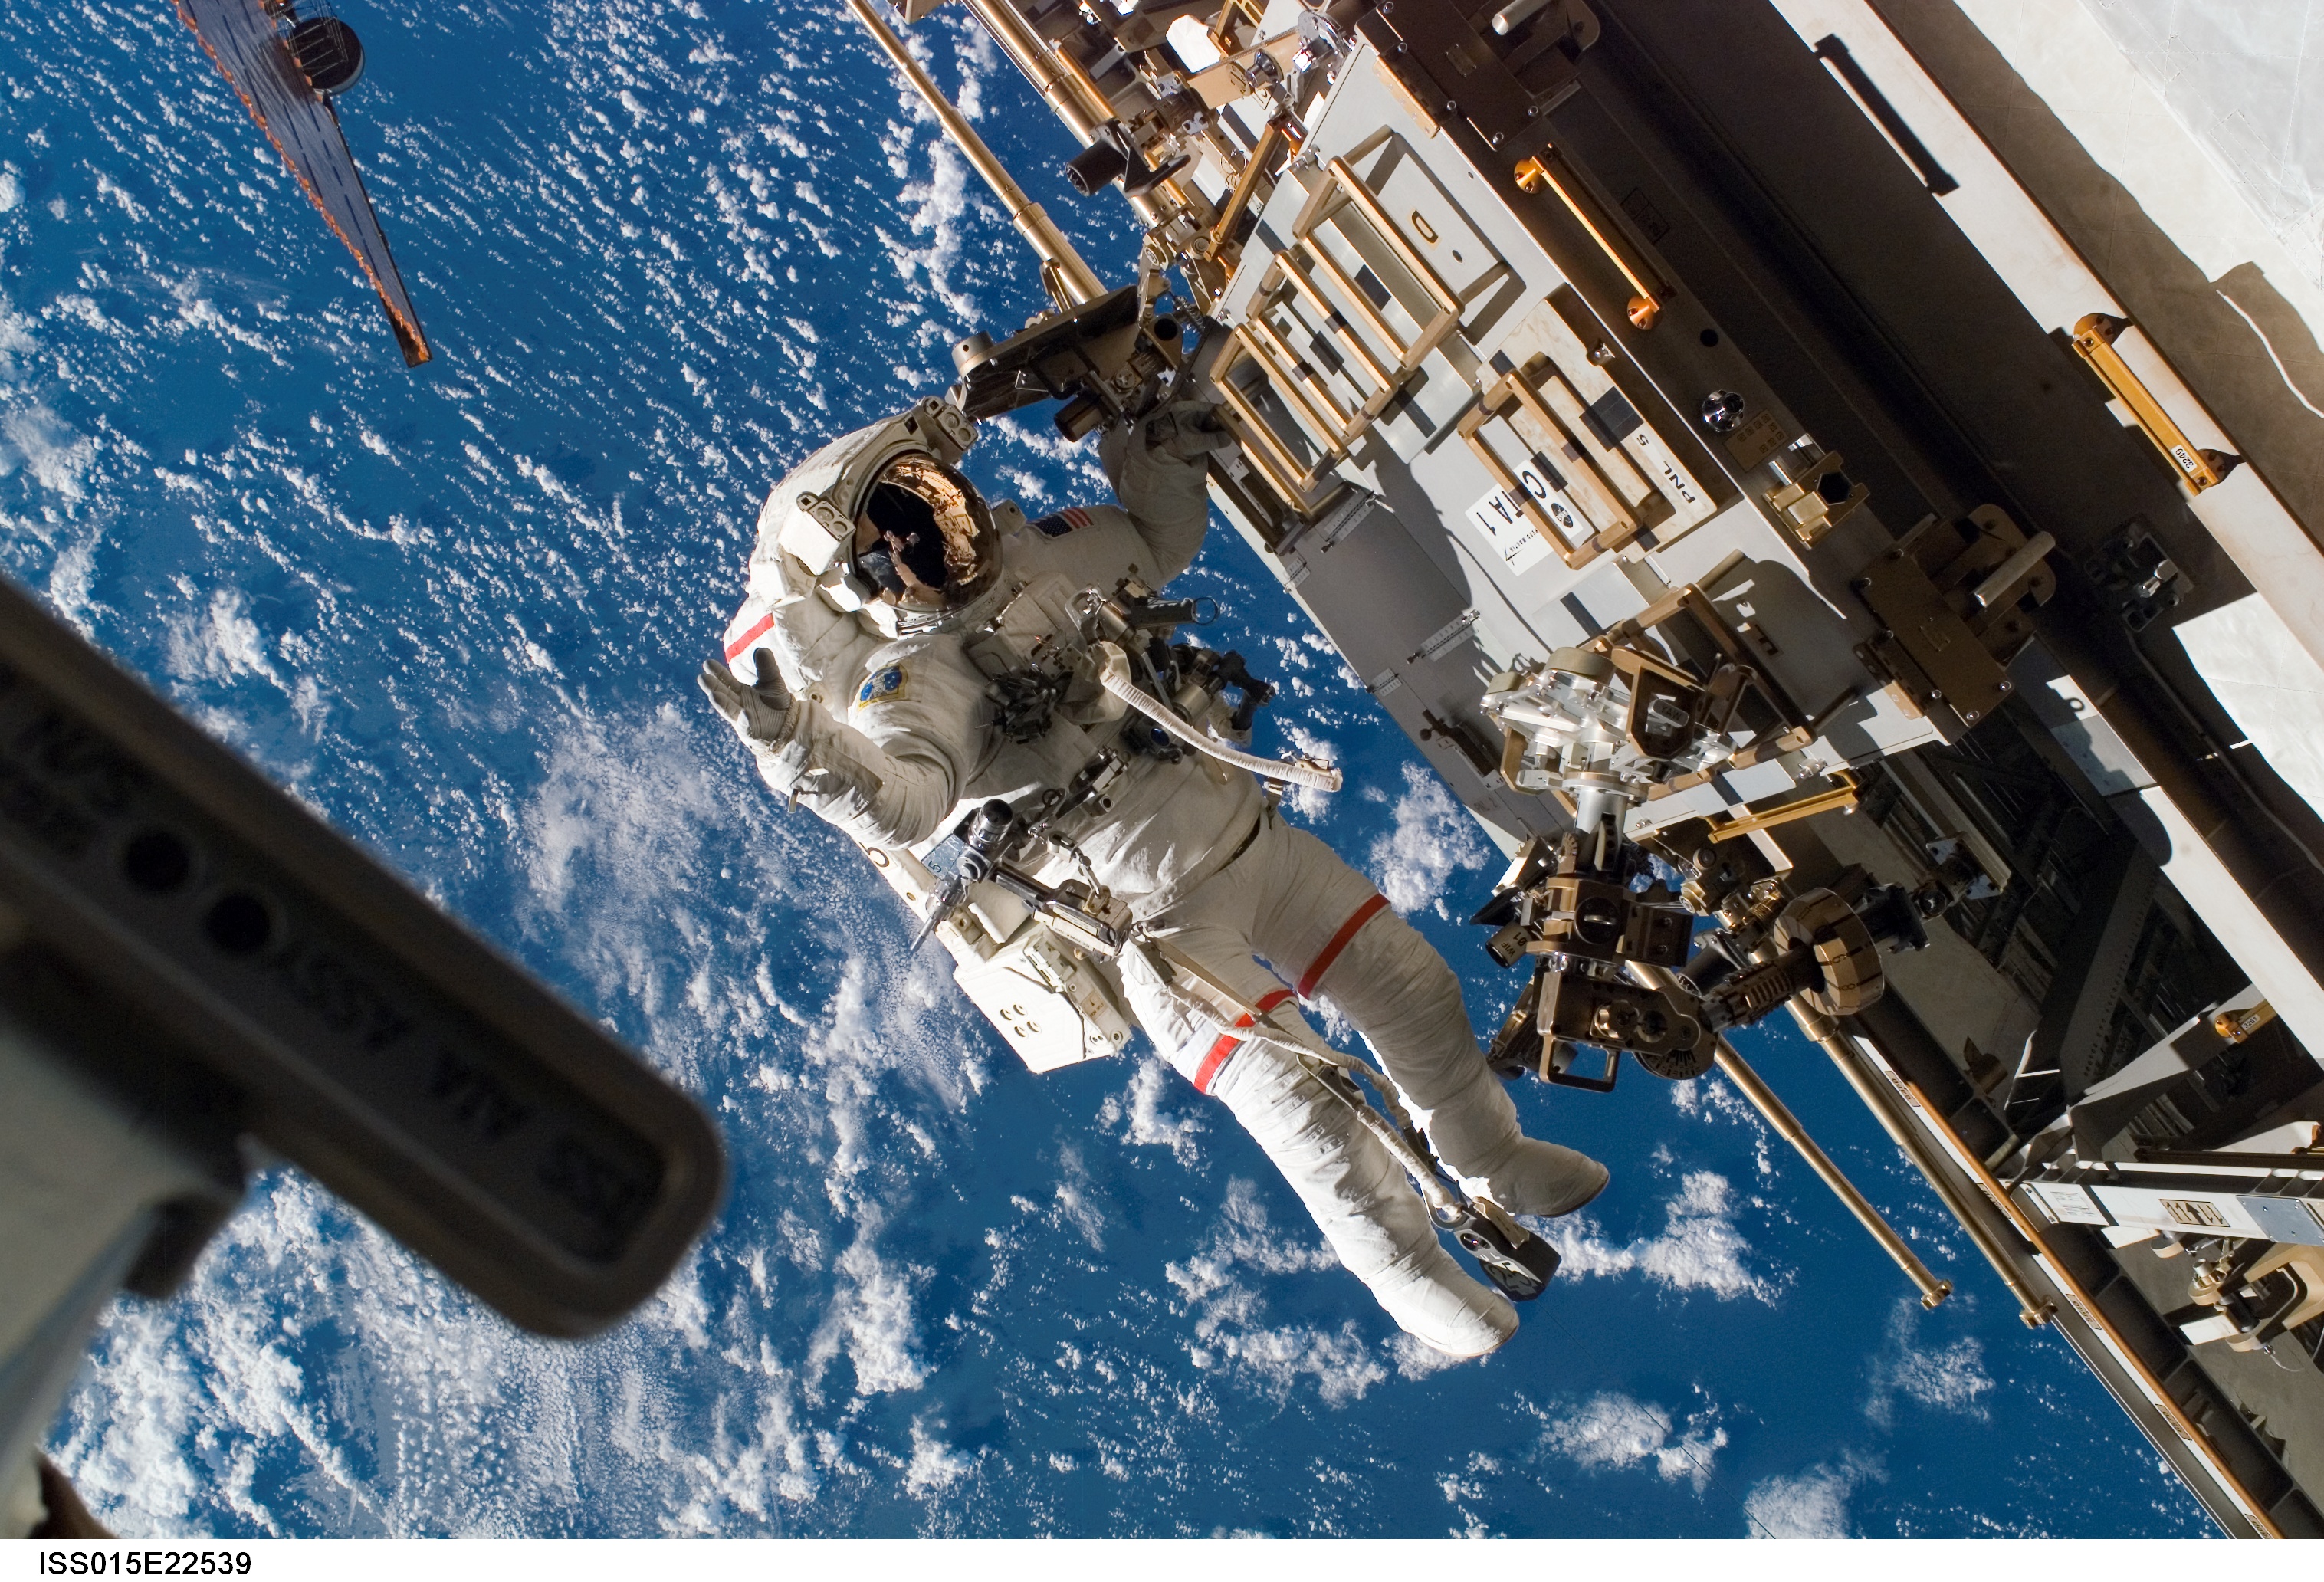 Astronaut floating outside International Space Station in space